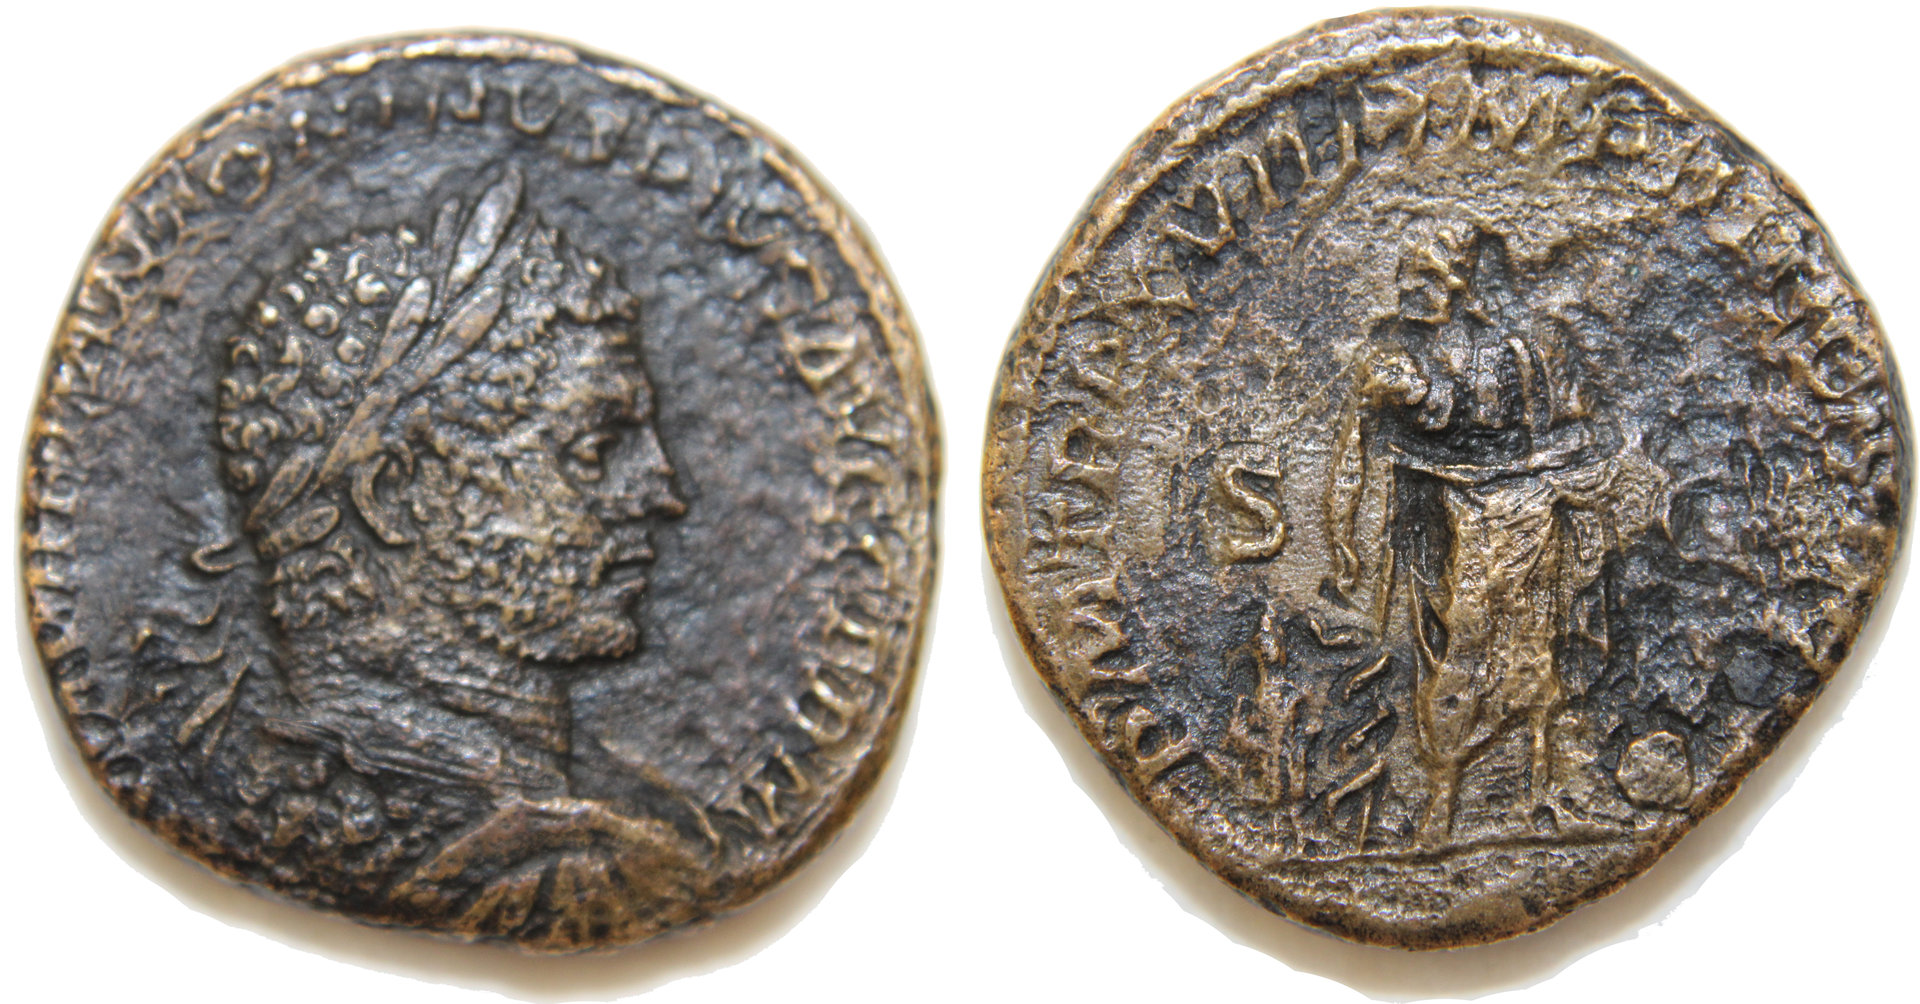 D-Camera Caracalla, Sestertius, Asclepius with Serpent, 6-27-20.jpg